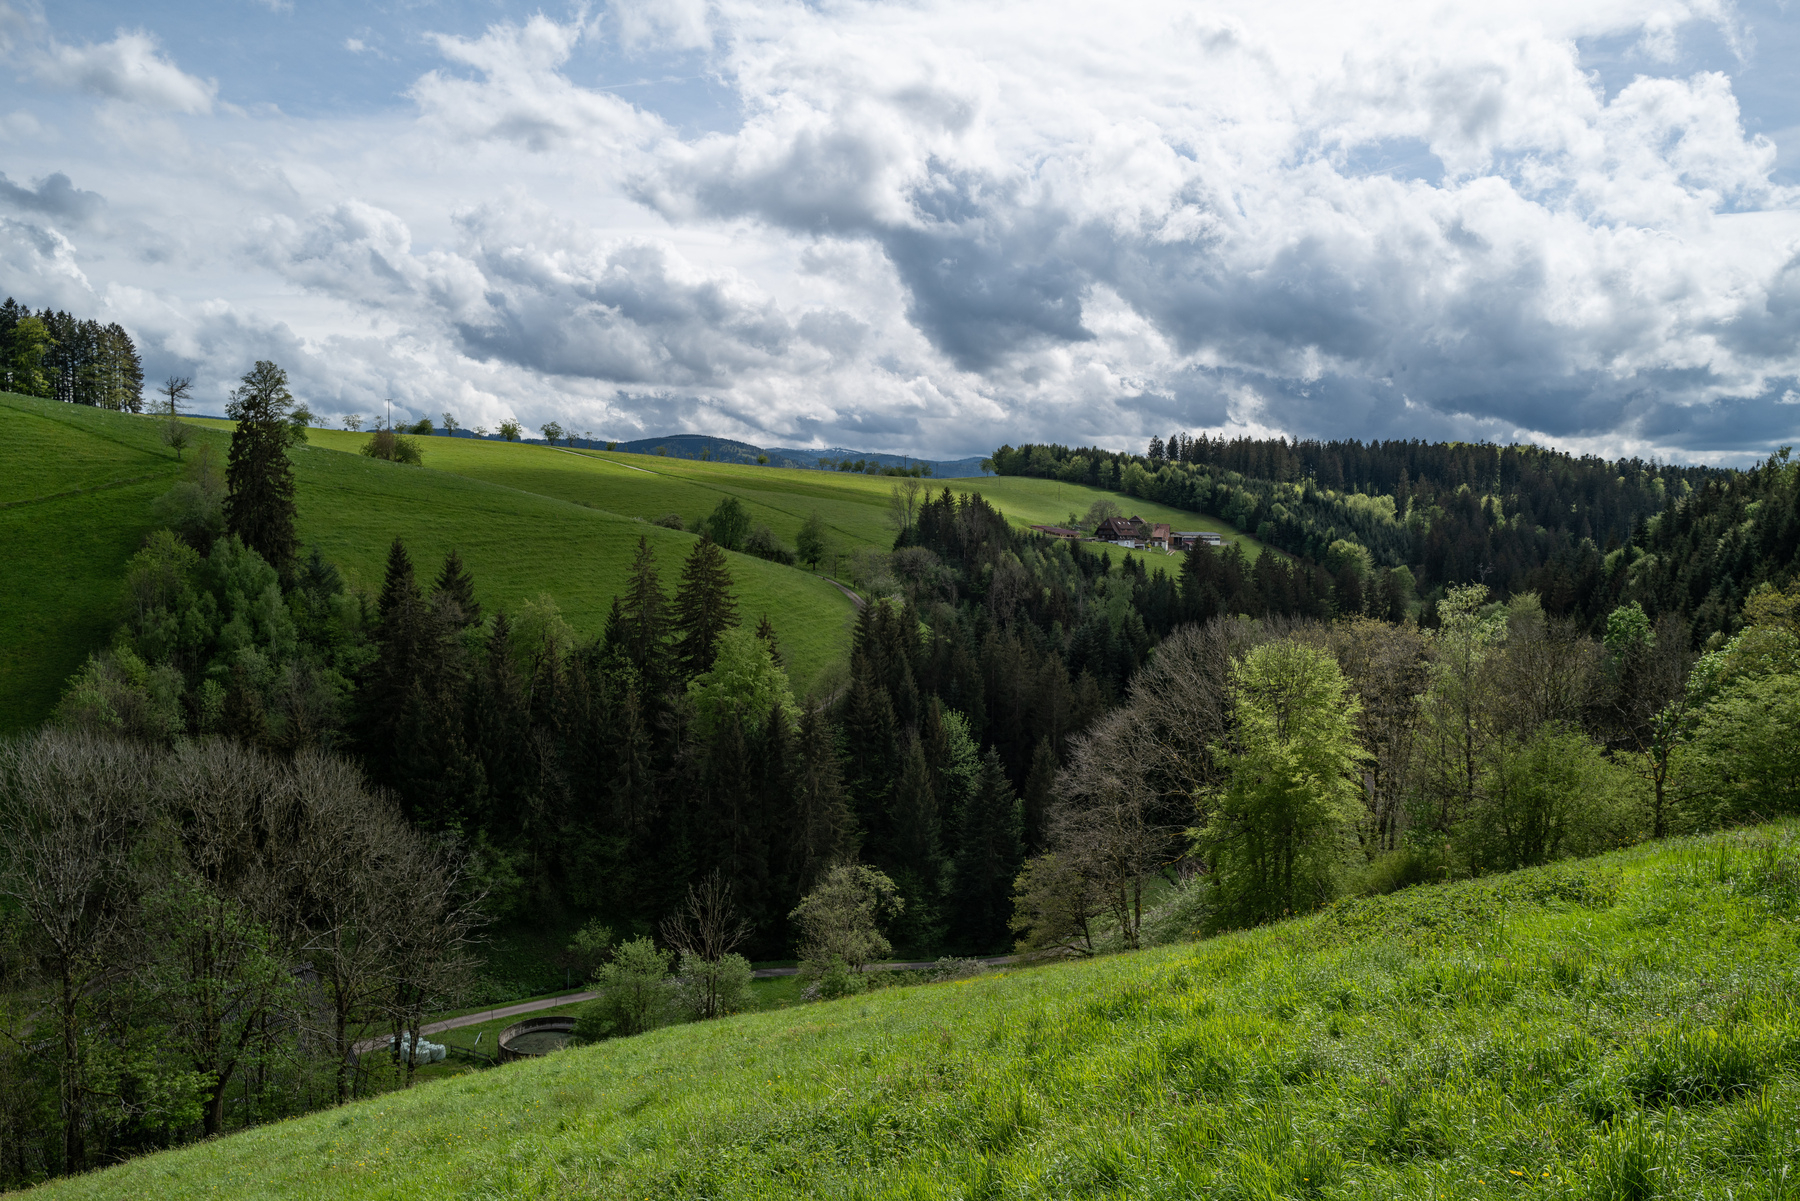 Vista overlooking a valley with fields and forests. All shades of green are represented. In the distance the mountains of the southern Black Forest have remainders of snow speckling the mountain tops. The clouds vary in color from dark to white, creating stark contrasts. 